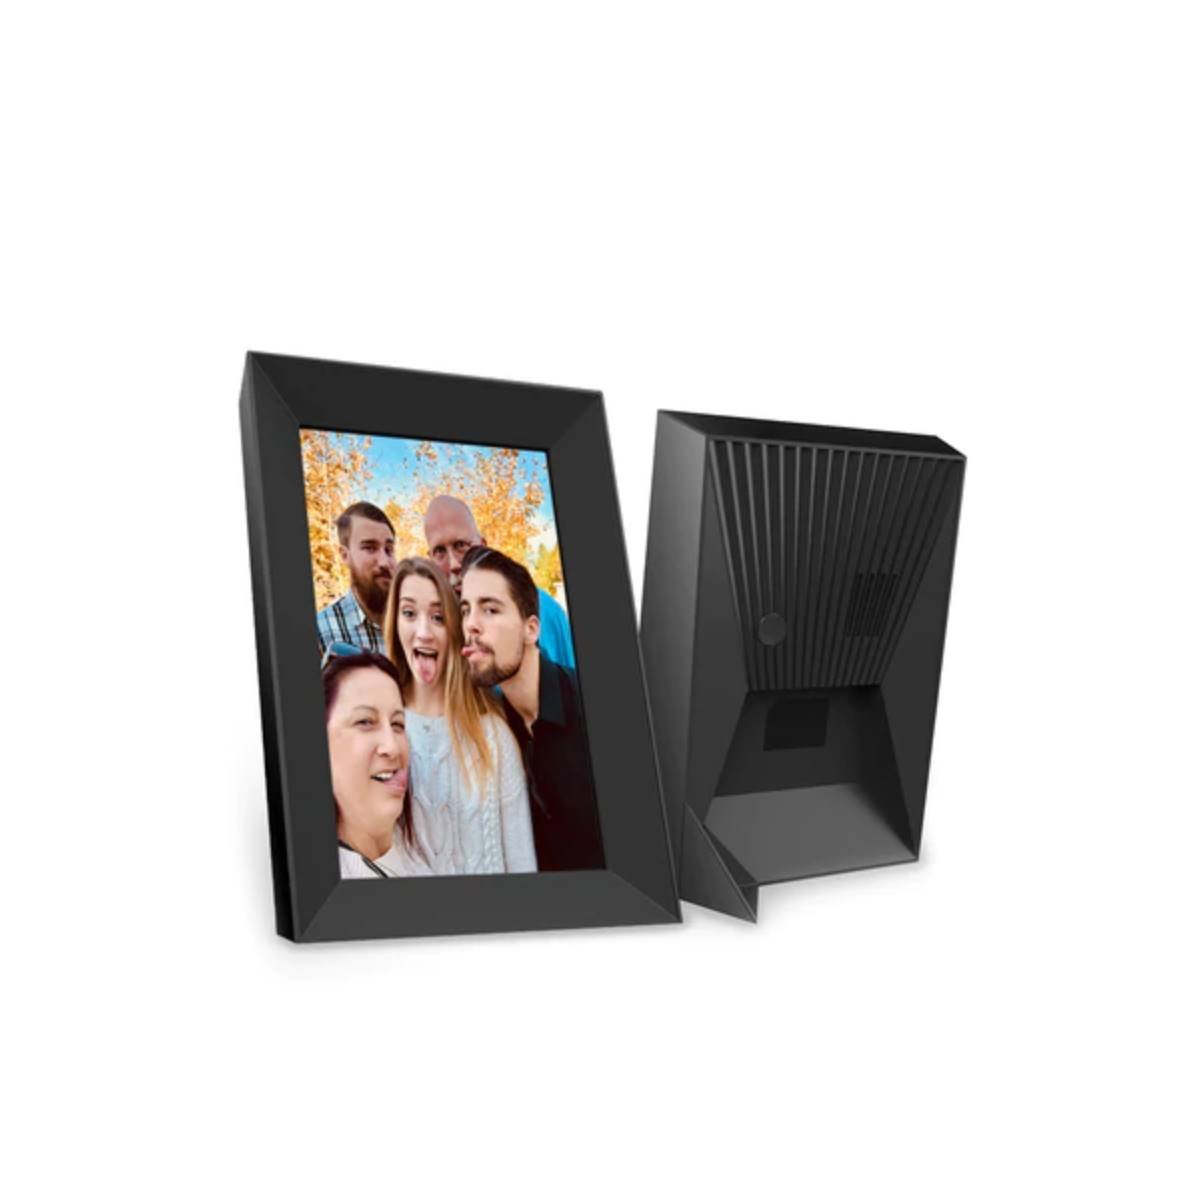 Eco4life Alba 8-inch Wi-Fi Digital Photo Frame with Auto Rotation and Photo and Video sharing - TECHOBOOM